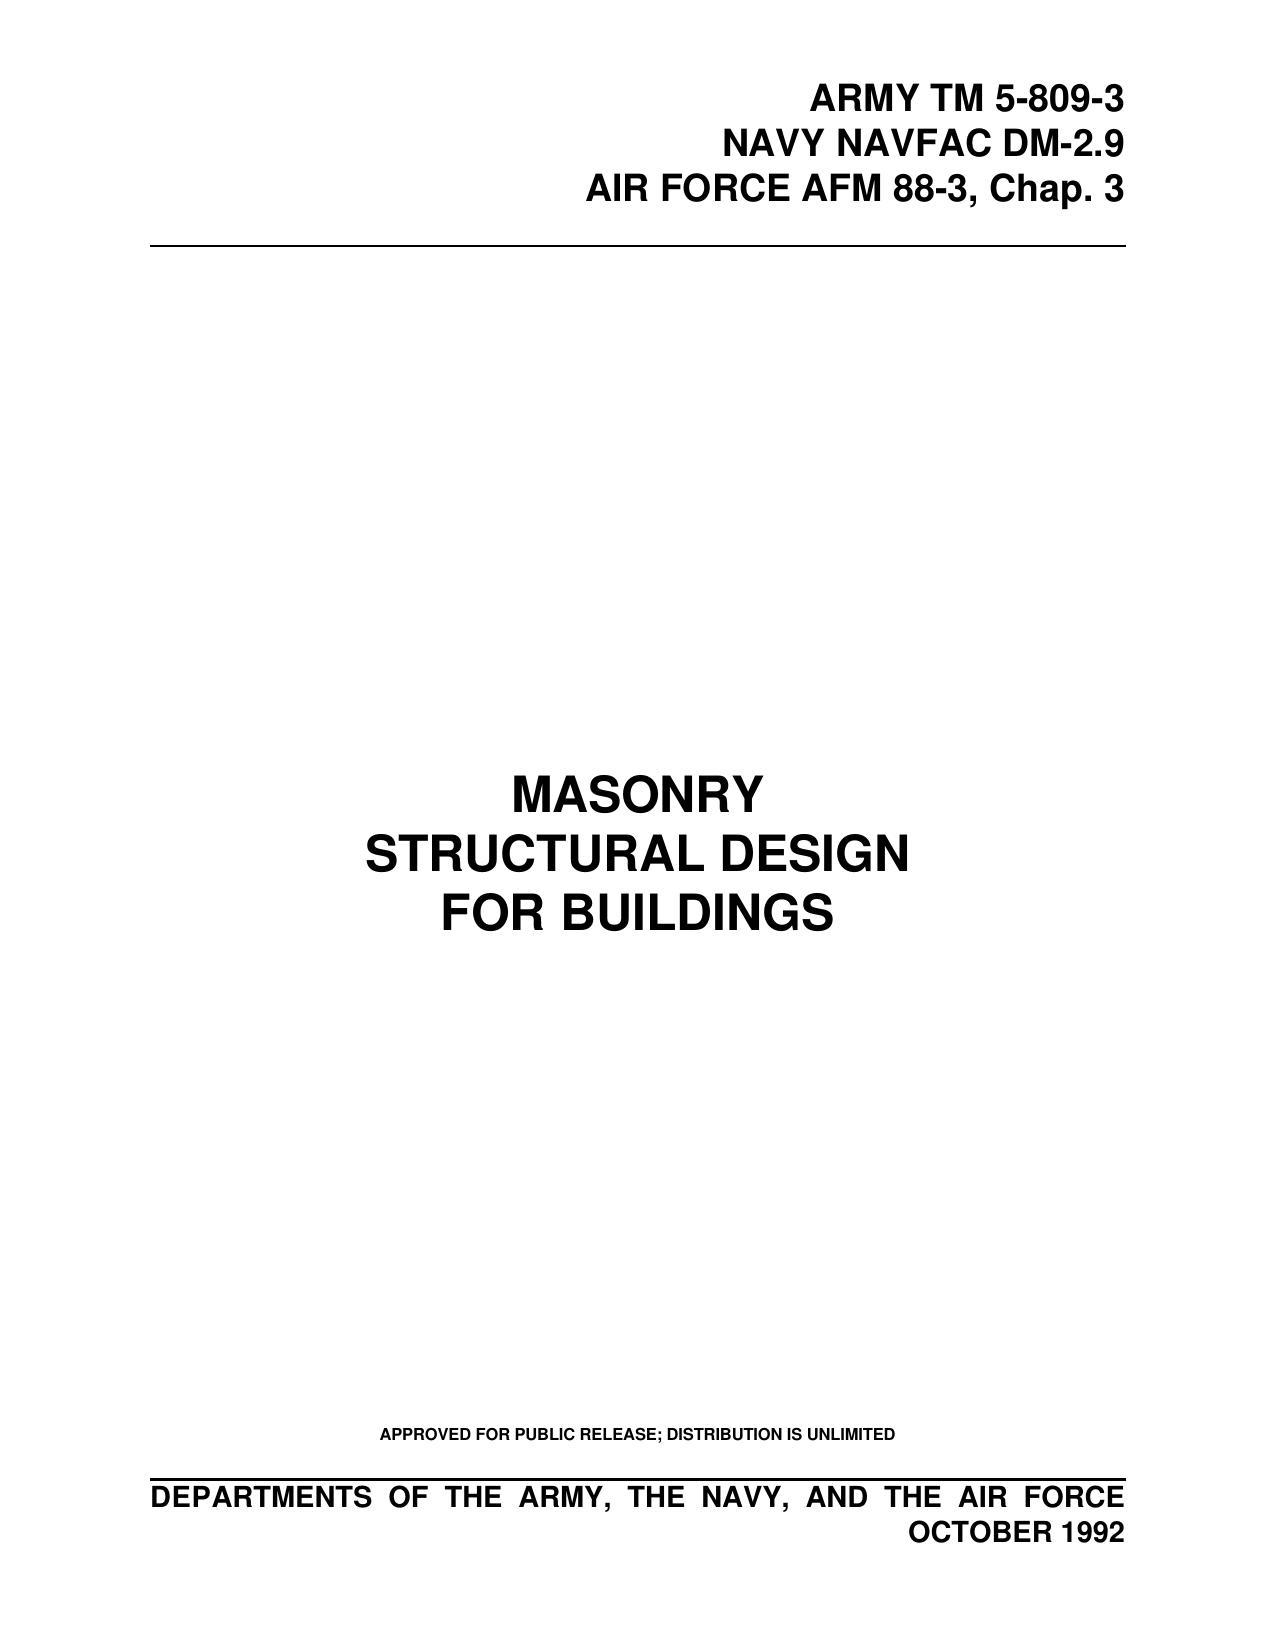 Masonry Structural Design for Buildings